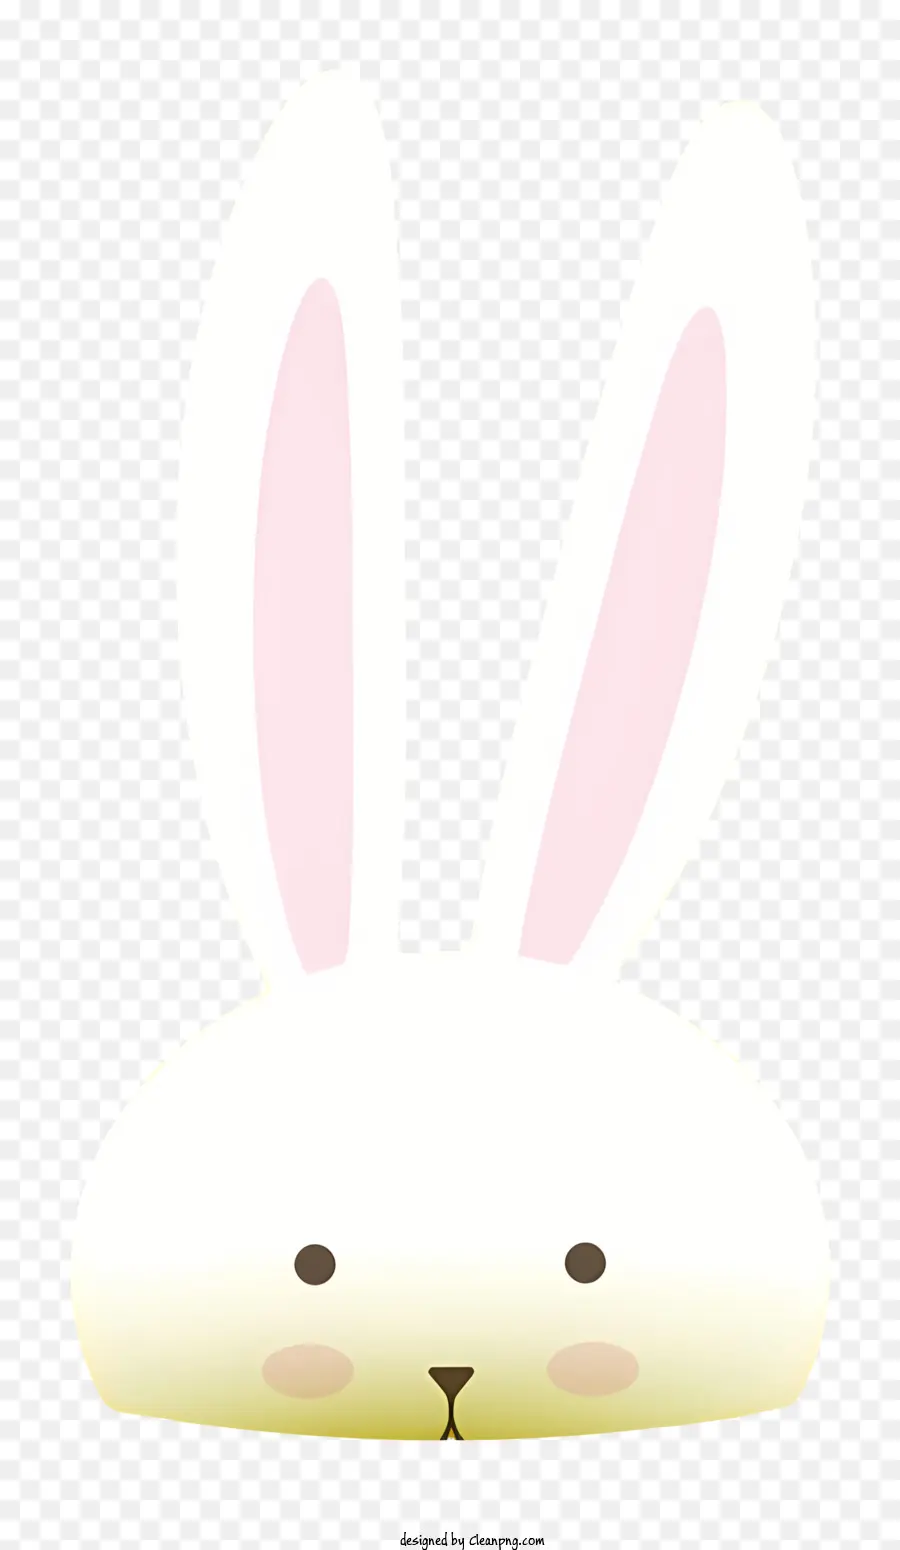 bunny face white rabbit pink eyes standing on hind legs perked up ears